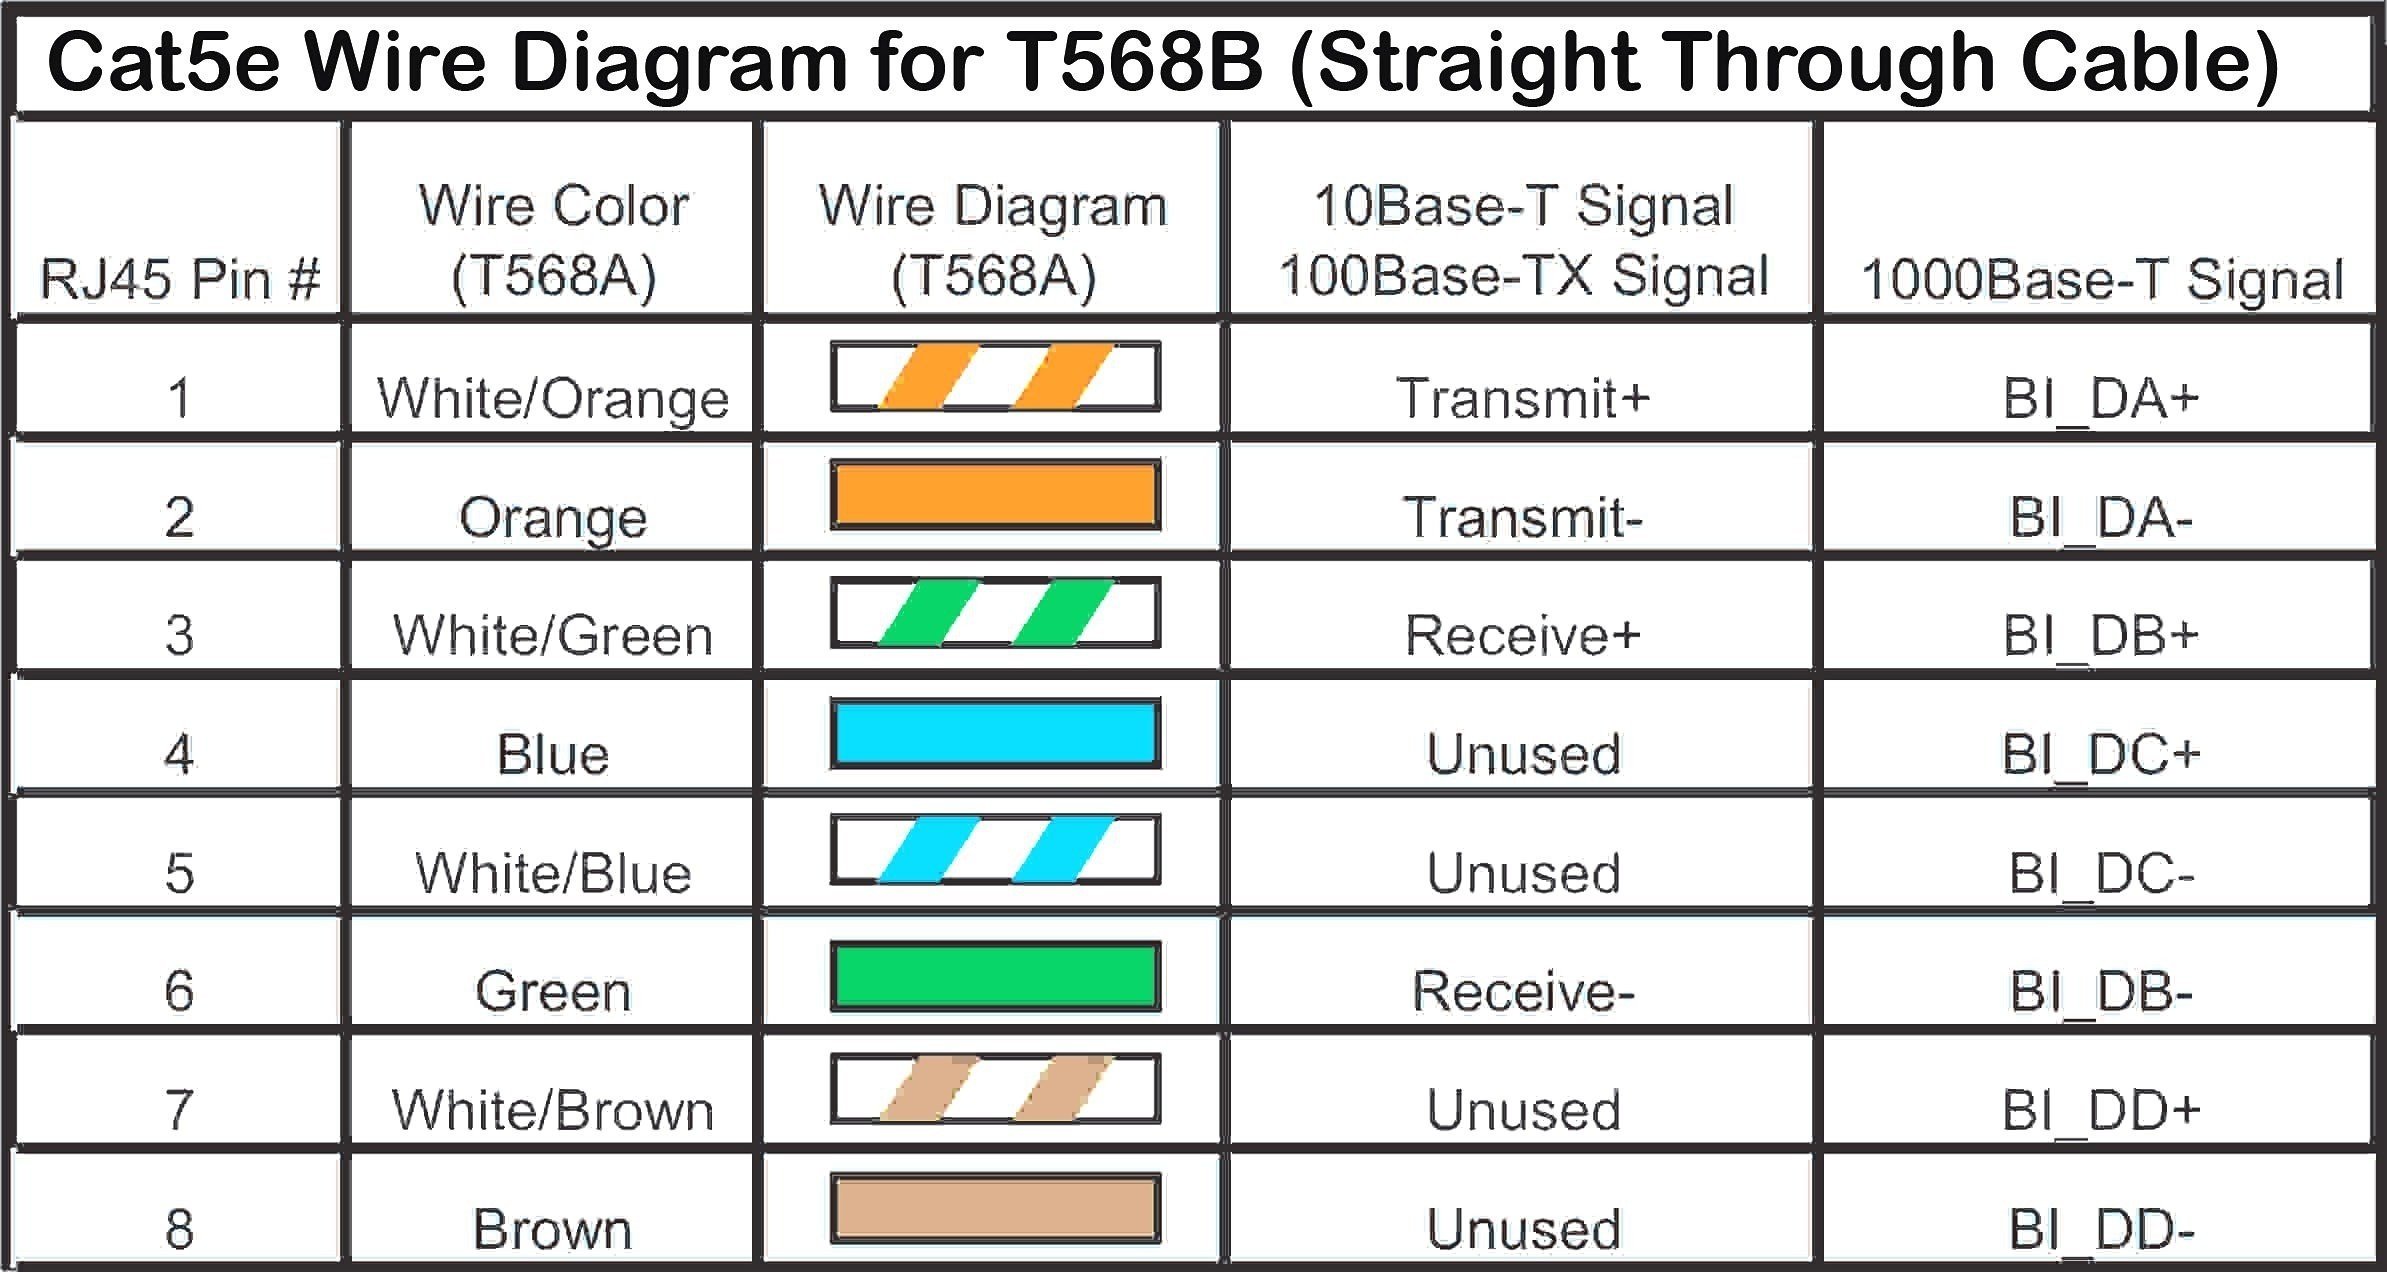 Wiring Diagram For A Cat5 Cable New Cat5e Wire Diagram New Ethernet Cable Wiring Diagram New Od Wiring